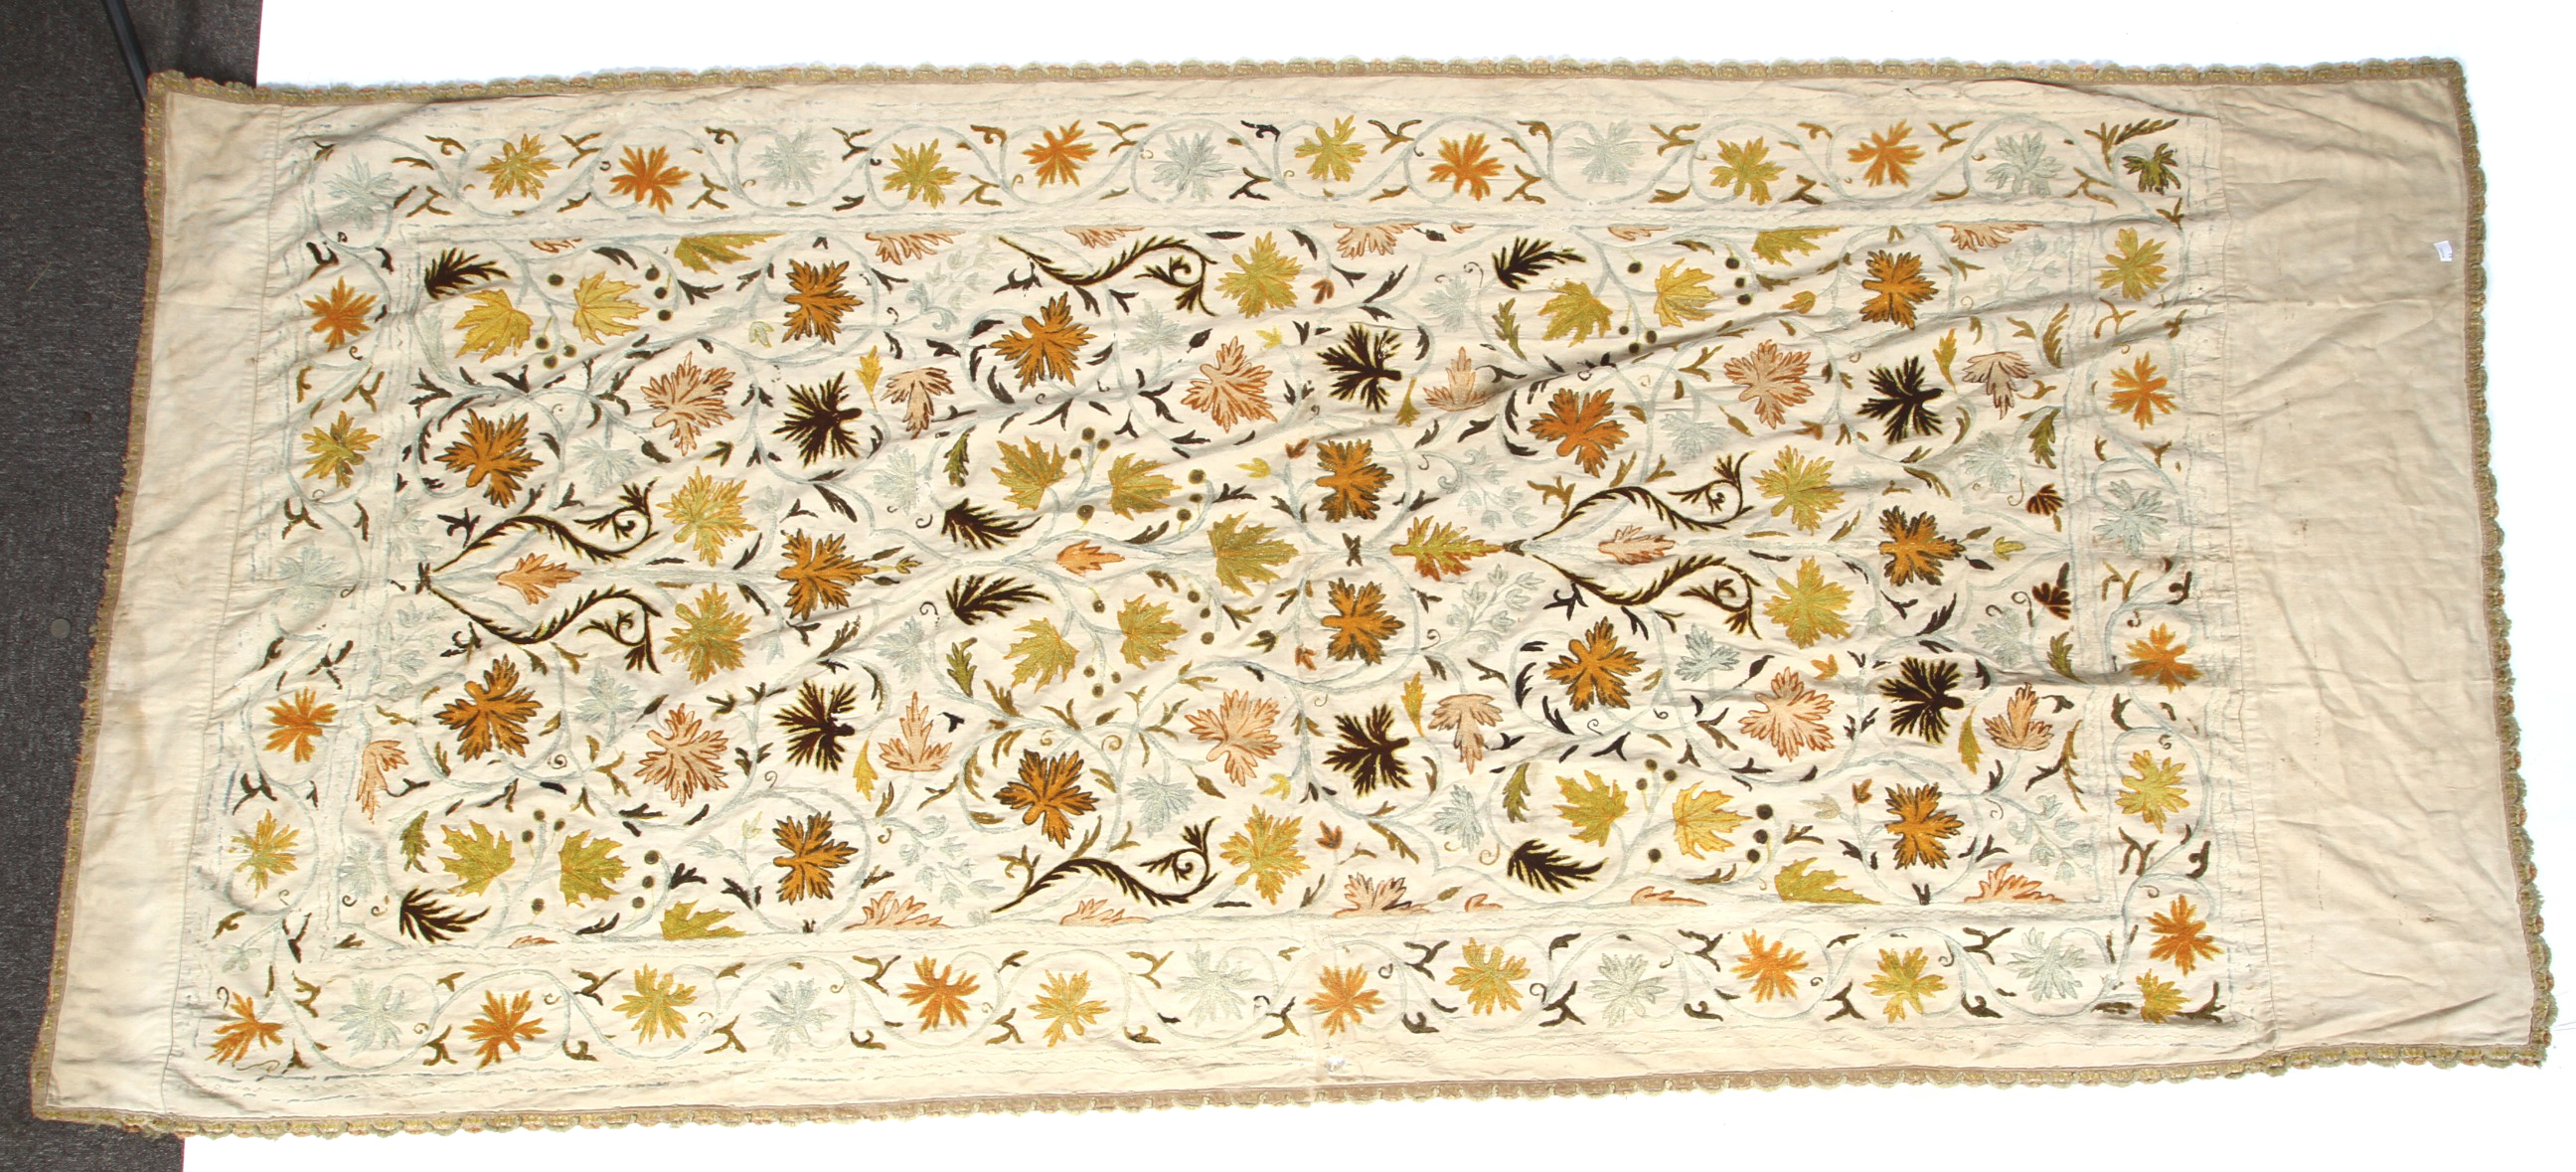 A early 20th century single bed hand embroidered (crewel work) bedspread.